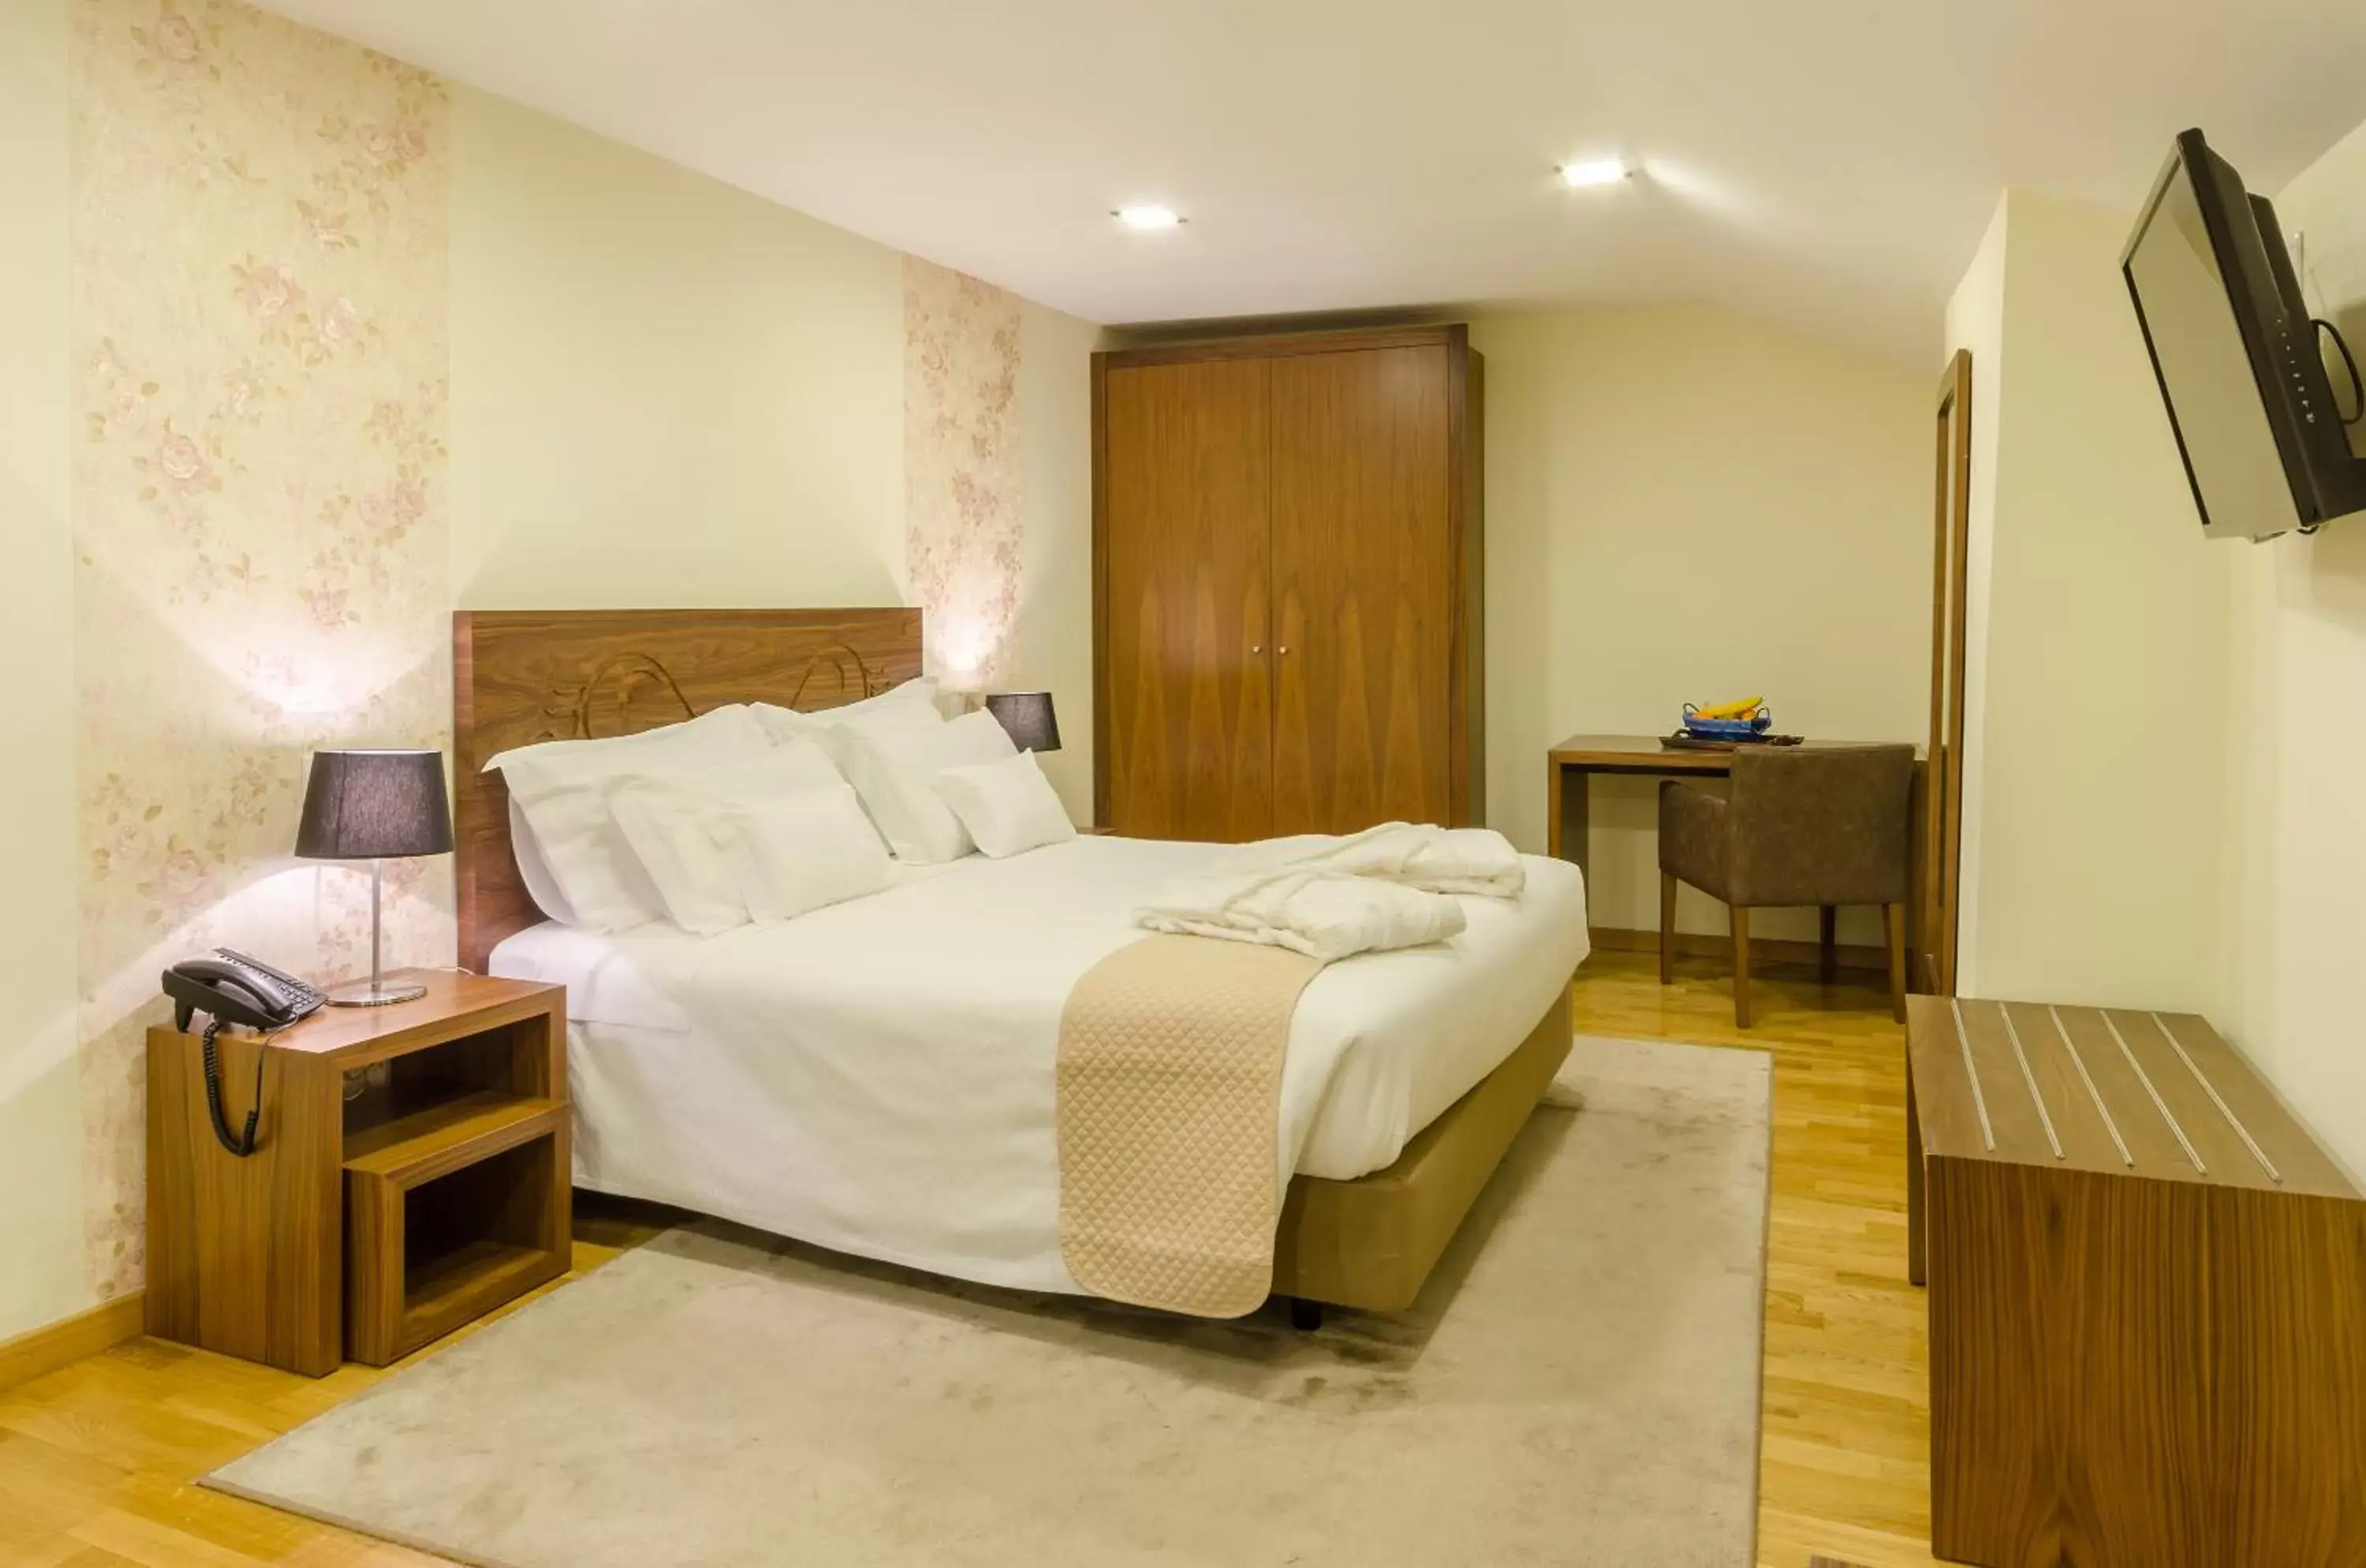 Standard Double or Twin Room in Hotel Borges Chiado